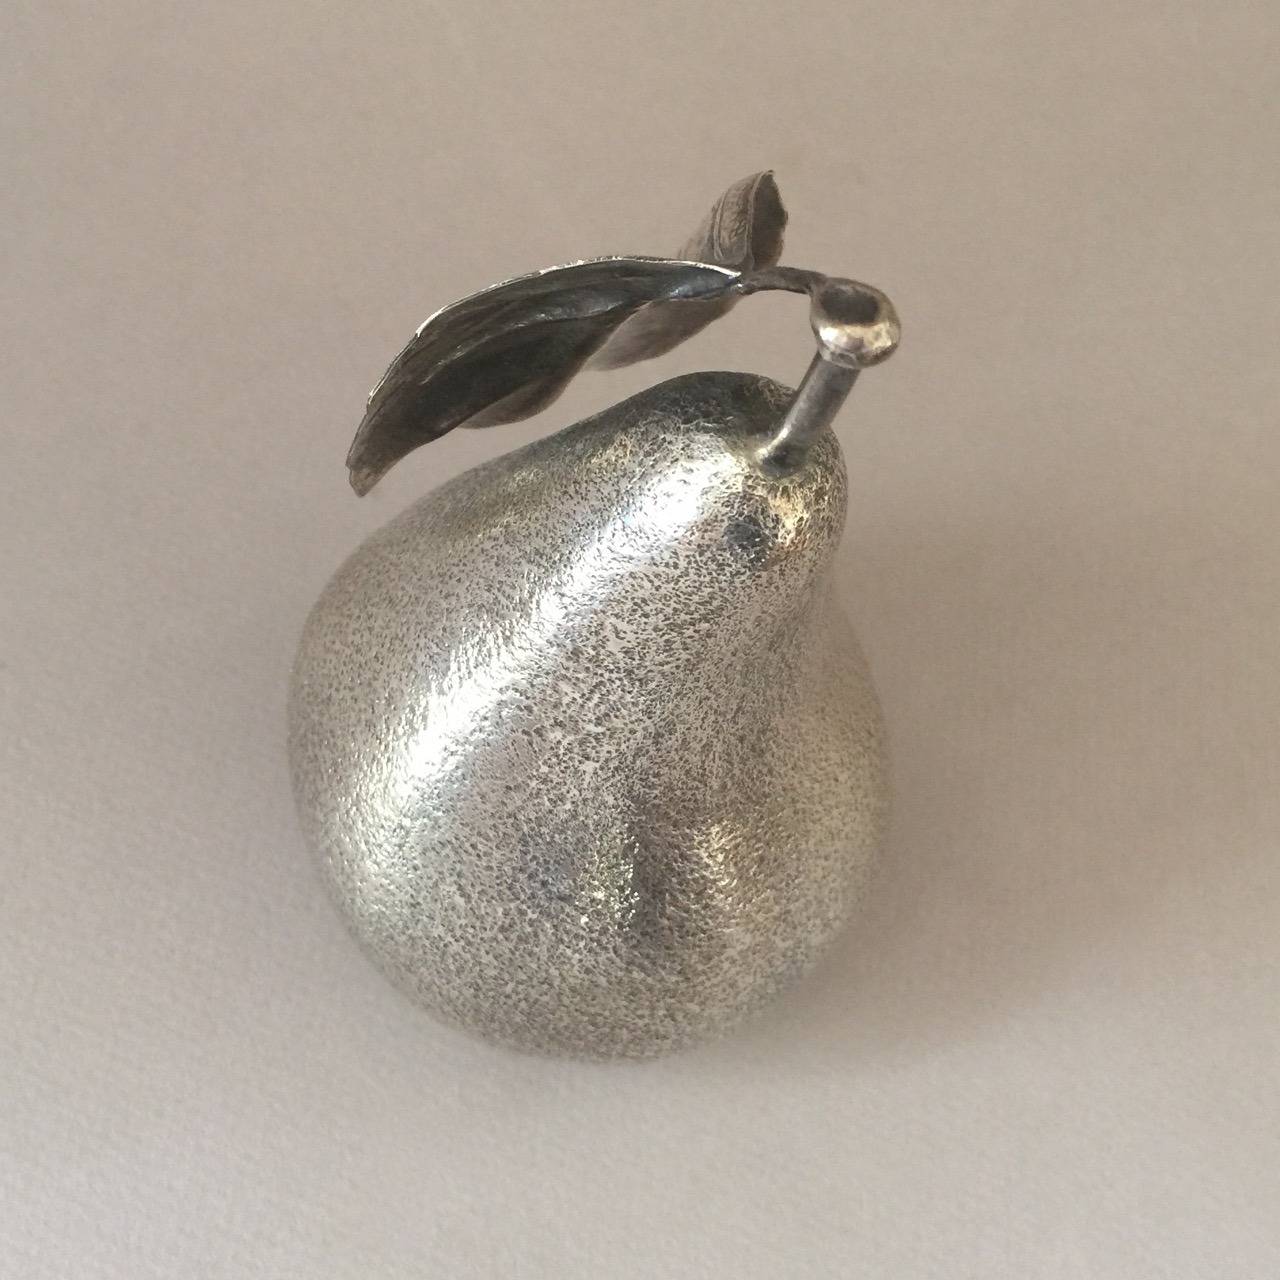 Buccellati Sterling Silver Pear

Exquisite representation of a pear, handmade in sterling silver. Heavy gauge silver. Realistically designed, life sized pear. 

Designer:	Buccellati
Maker:	Buccellati
Design #:	N/A
Circa:	20th